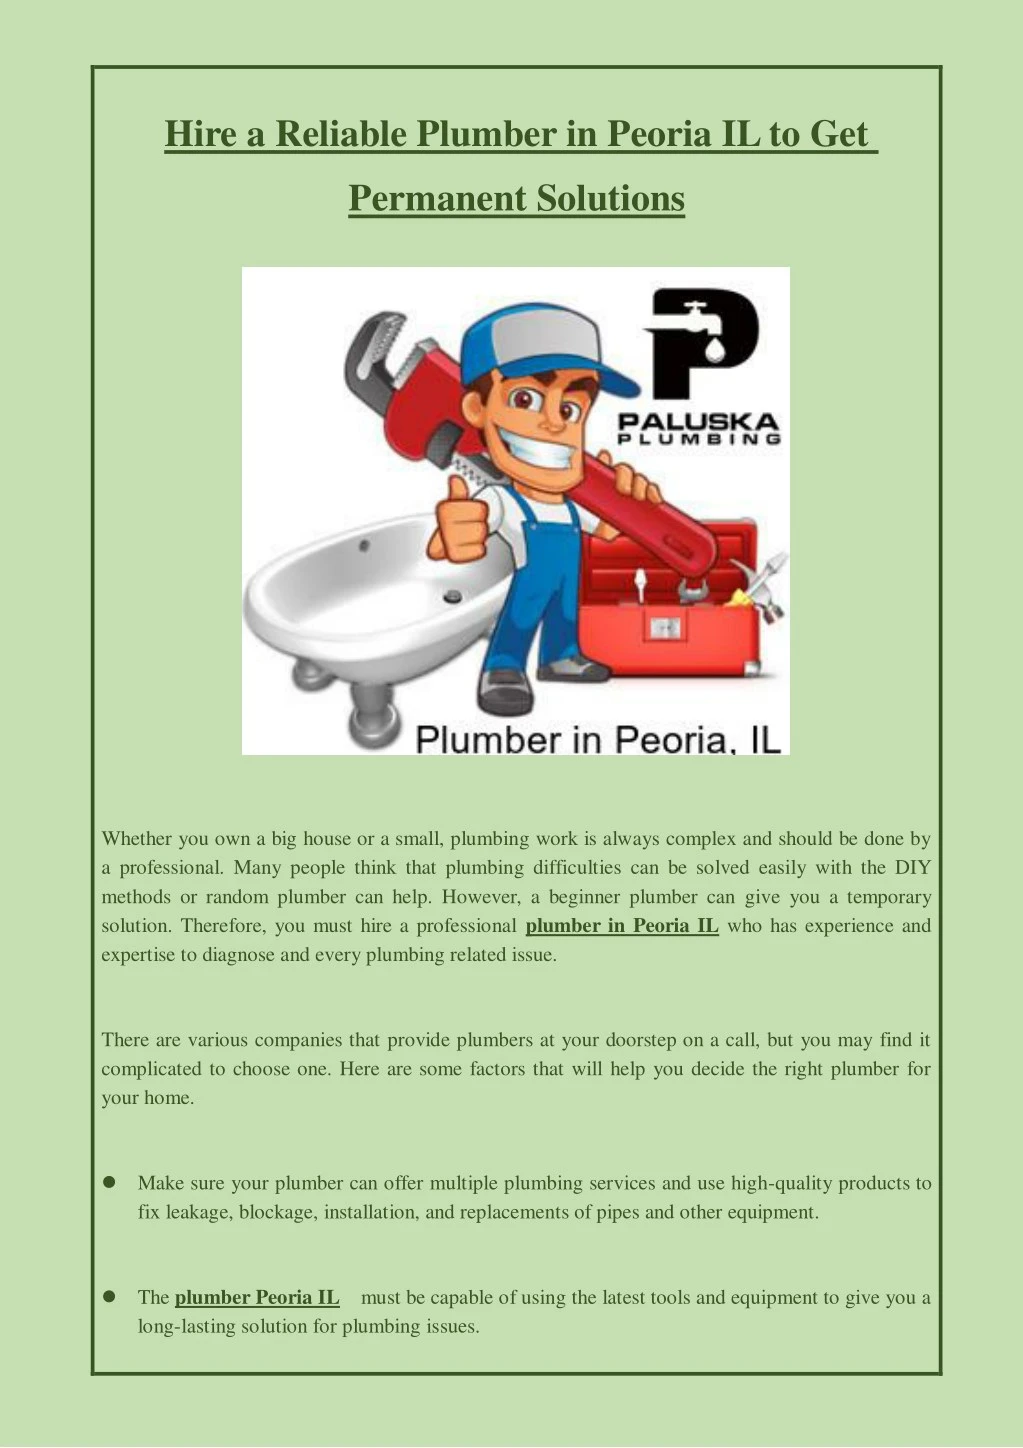 hire a reliable plumber in peoria il to get